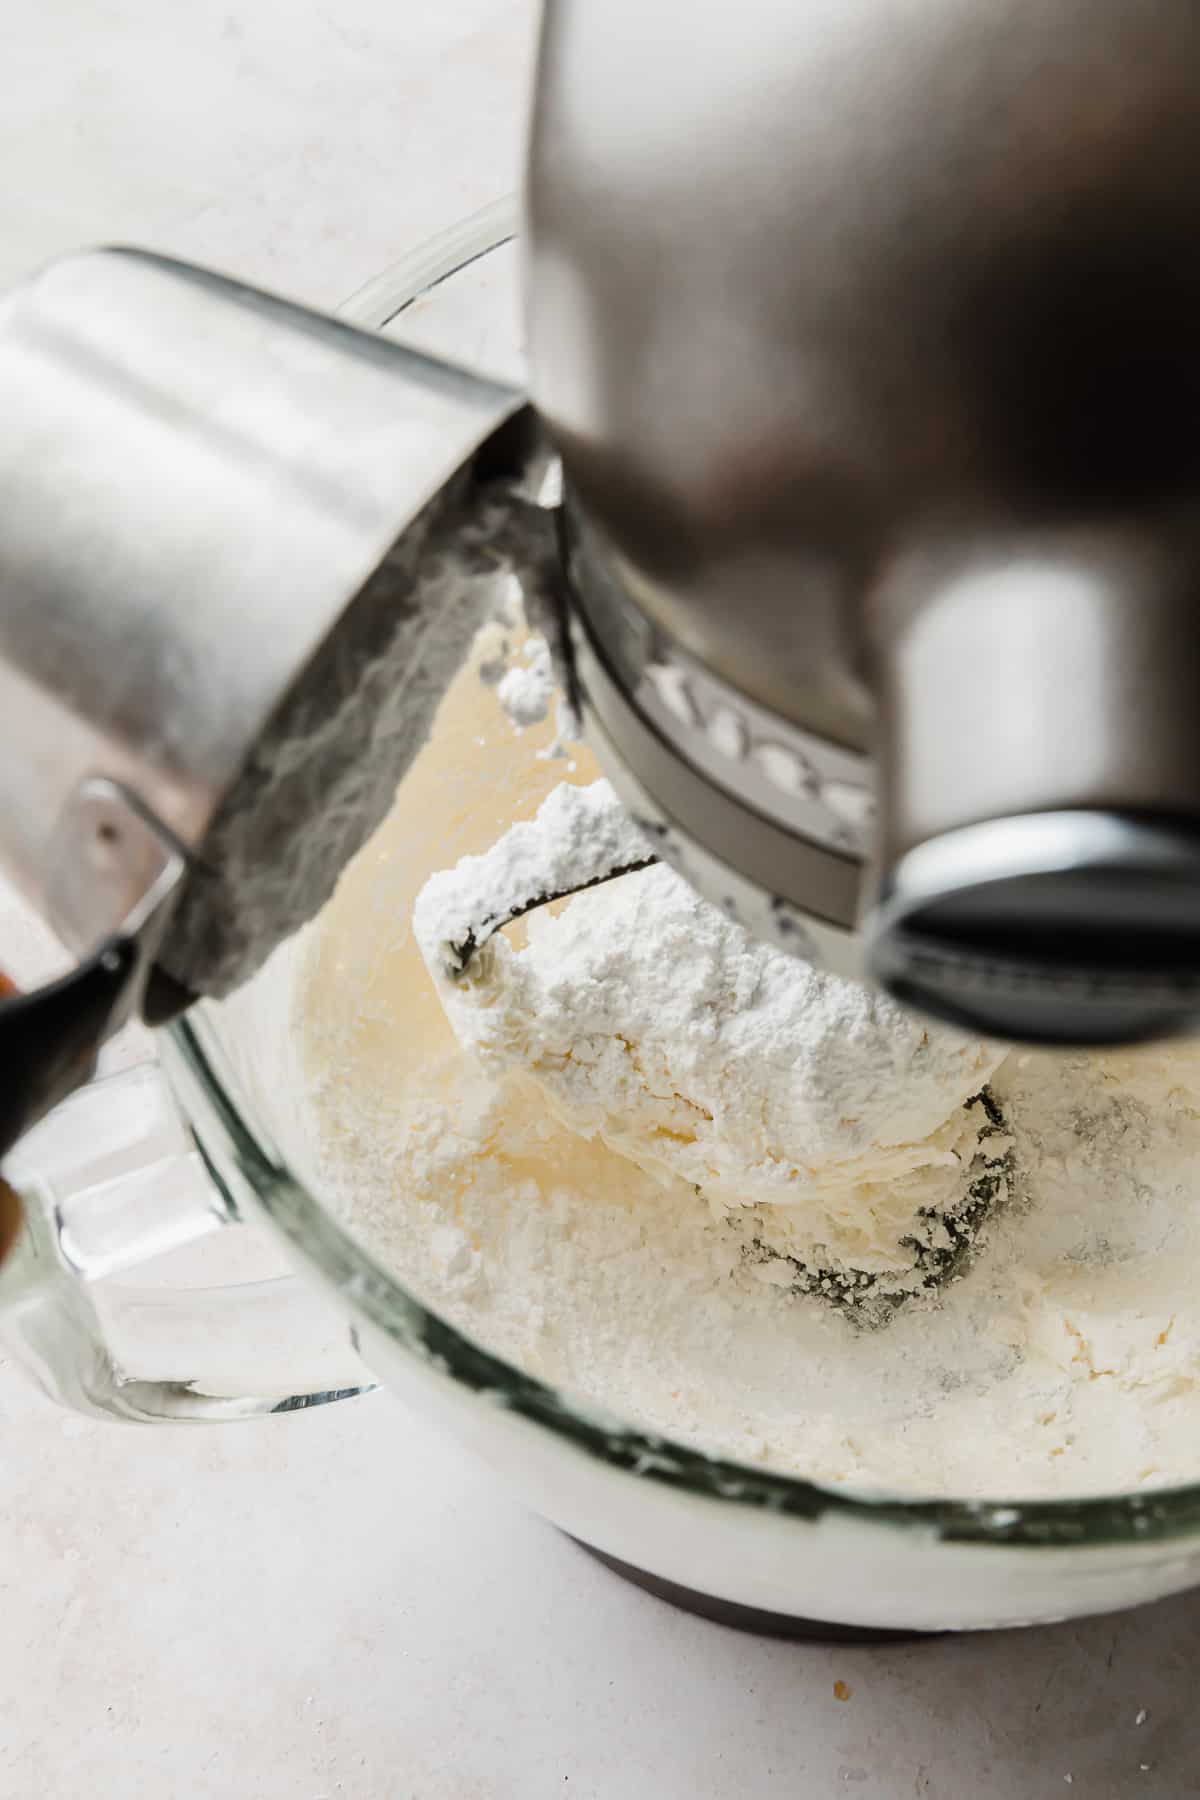 Powdered sugar being poured into a stand mixer bowl that has creamed butter in it, for making Chocolate Buttercream Frosting with melted chocolate.